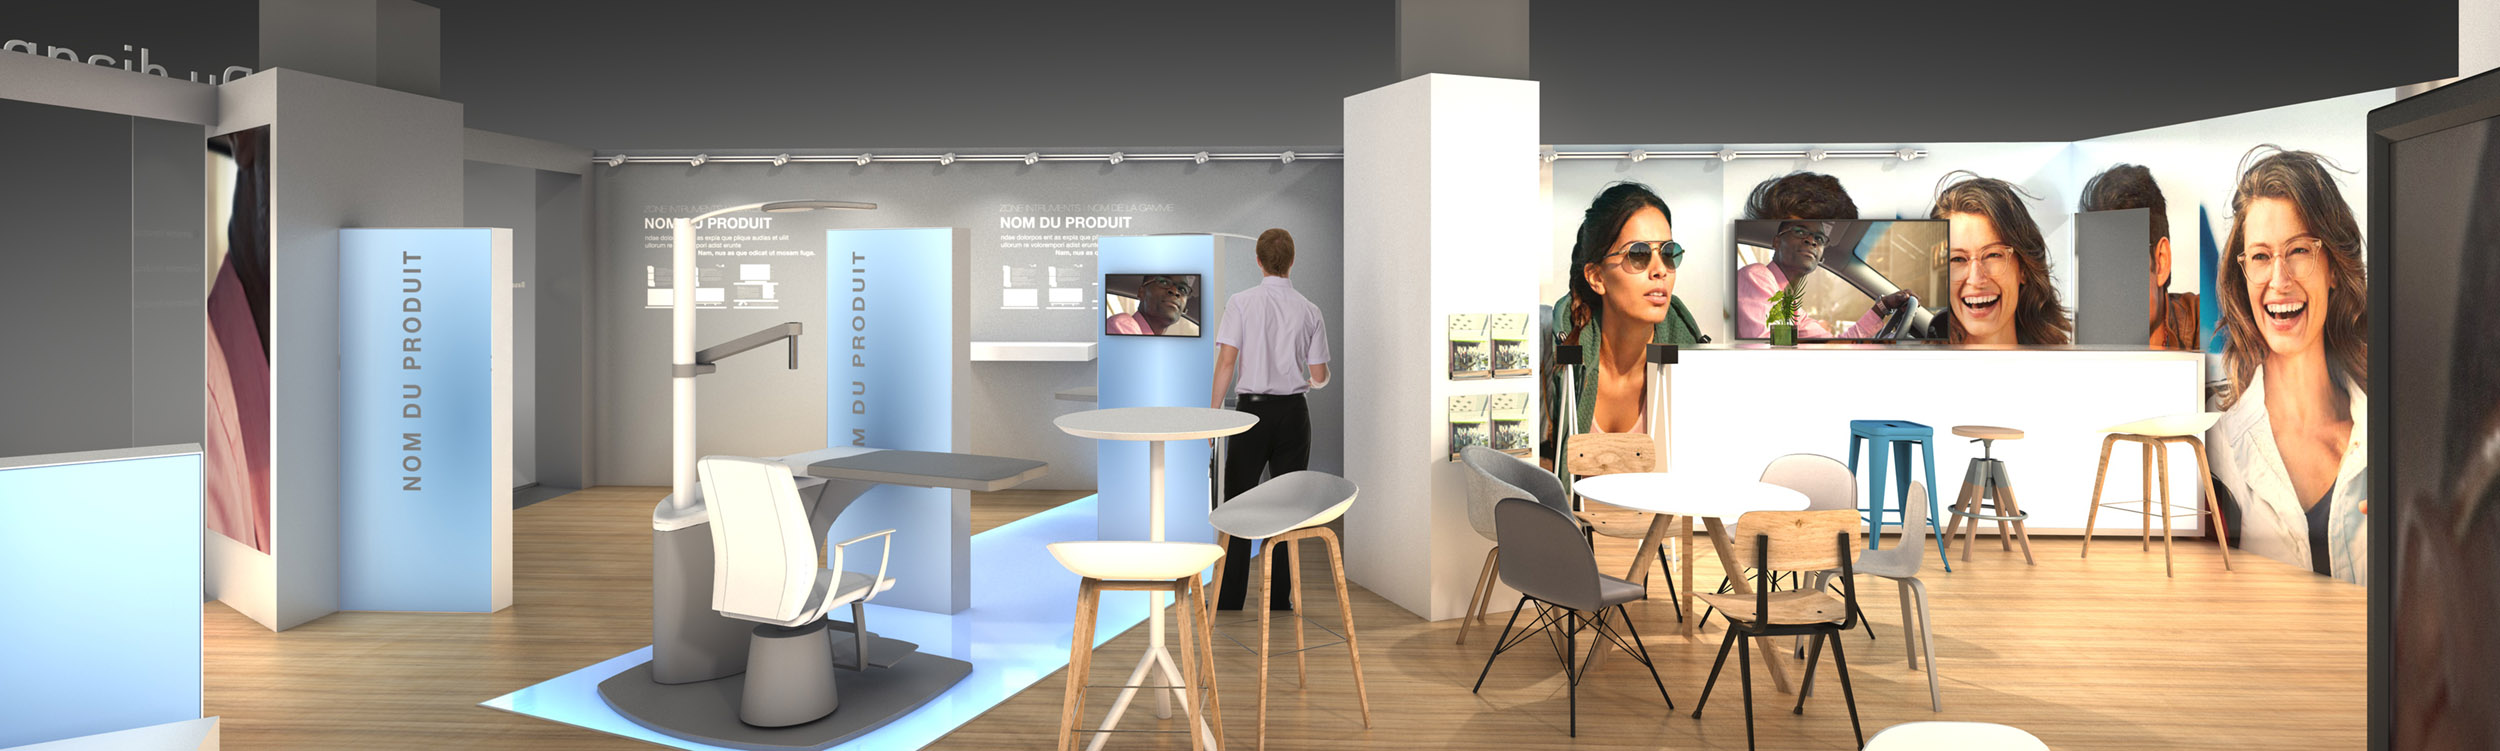 stand booth essilor sfo 20.jpg